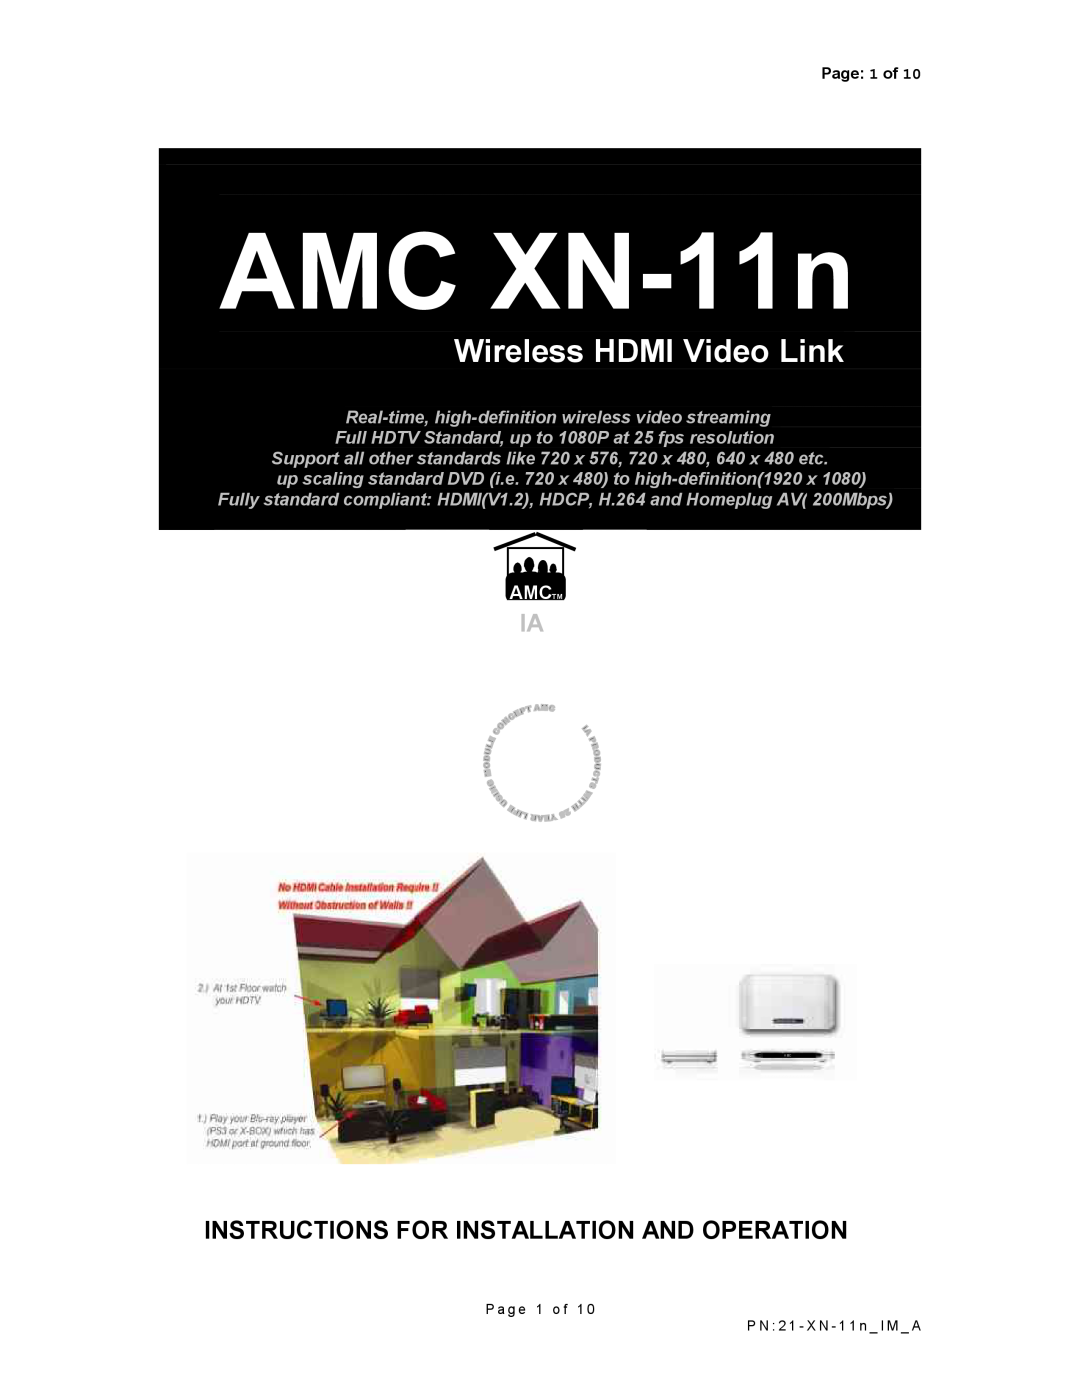 AMC manual AMC XN-11n, Wireless HDMI Video Link, Instructions For Installation And Operation, Amctm 